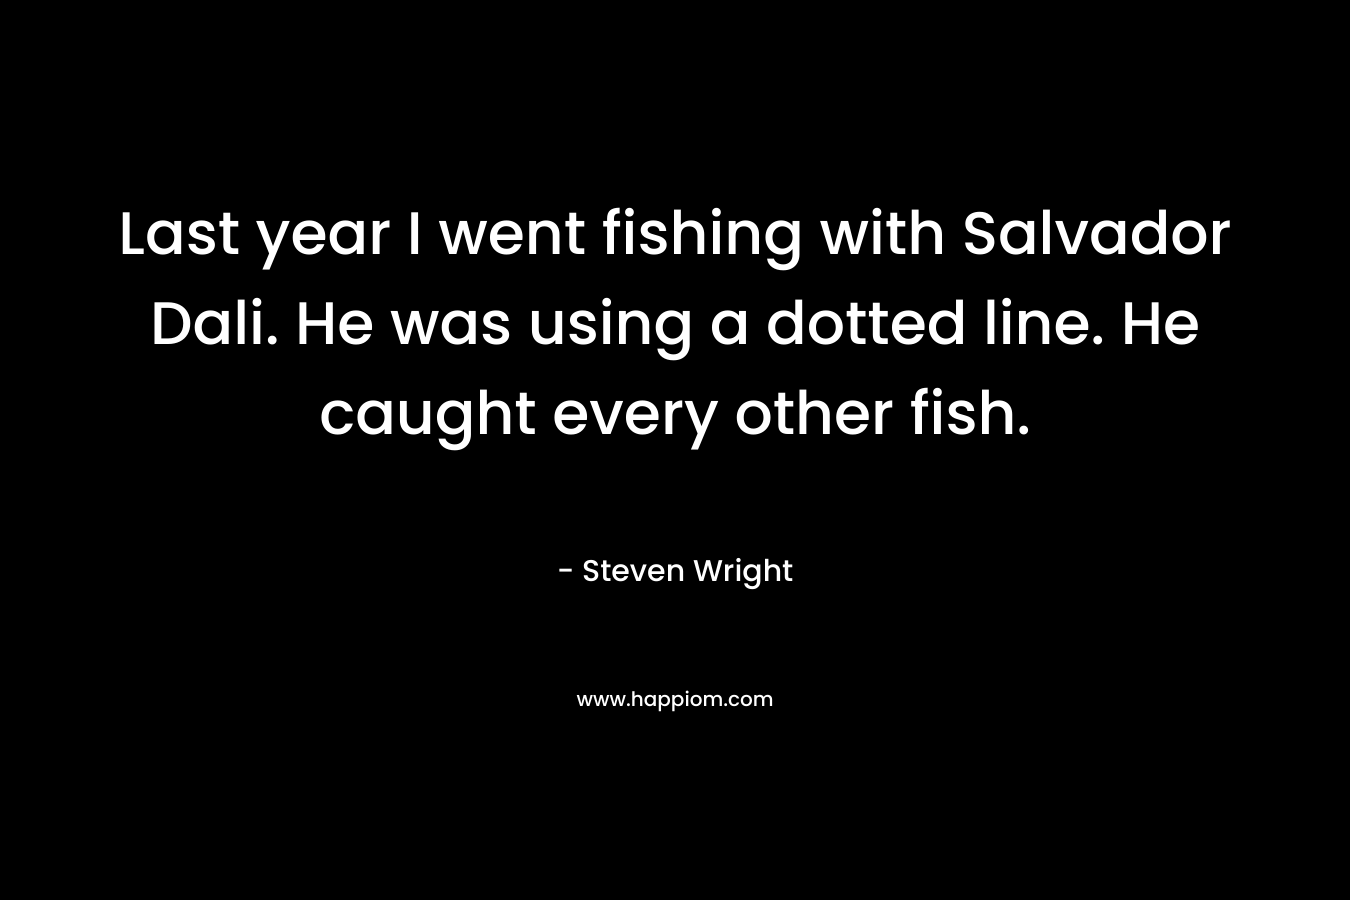 Last year I went fishing with Salvador Dali. He was using a dotted line. He caught every other fish.